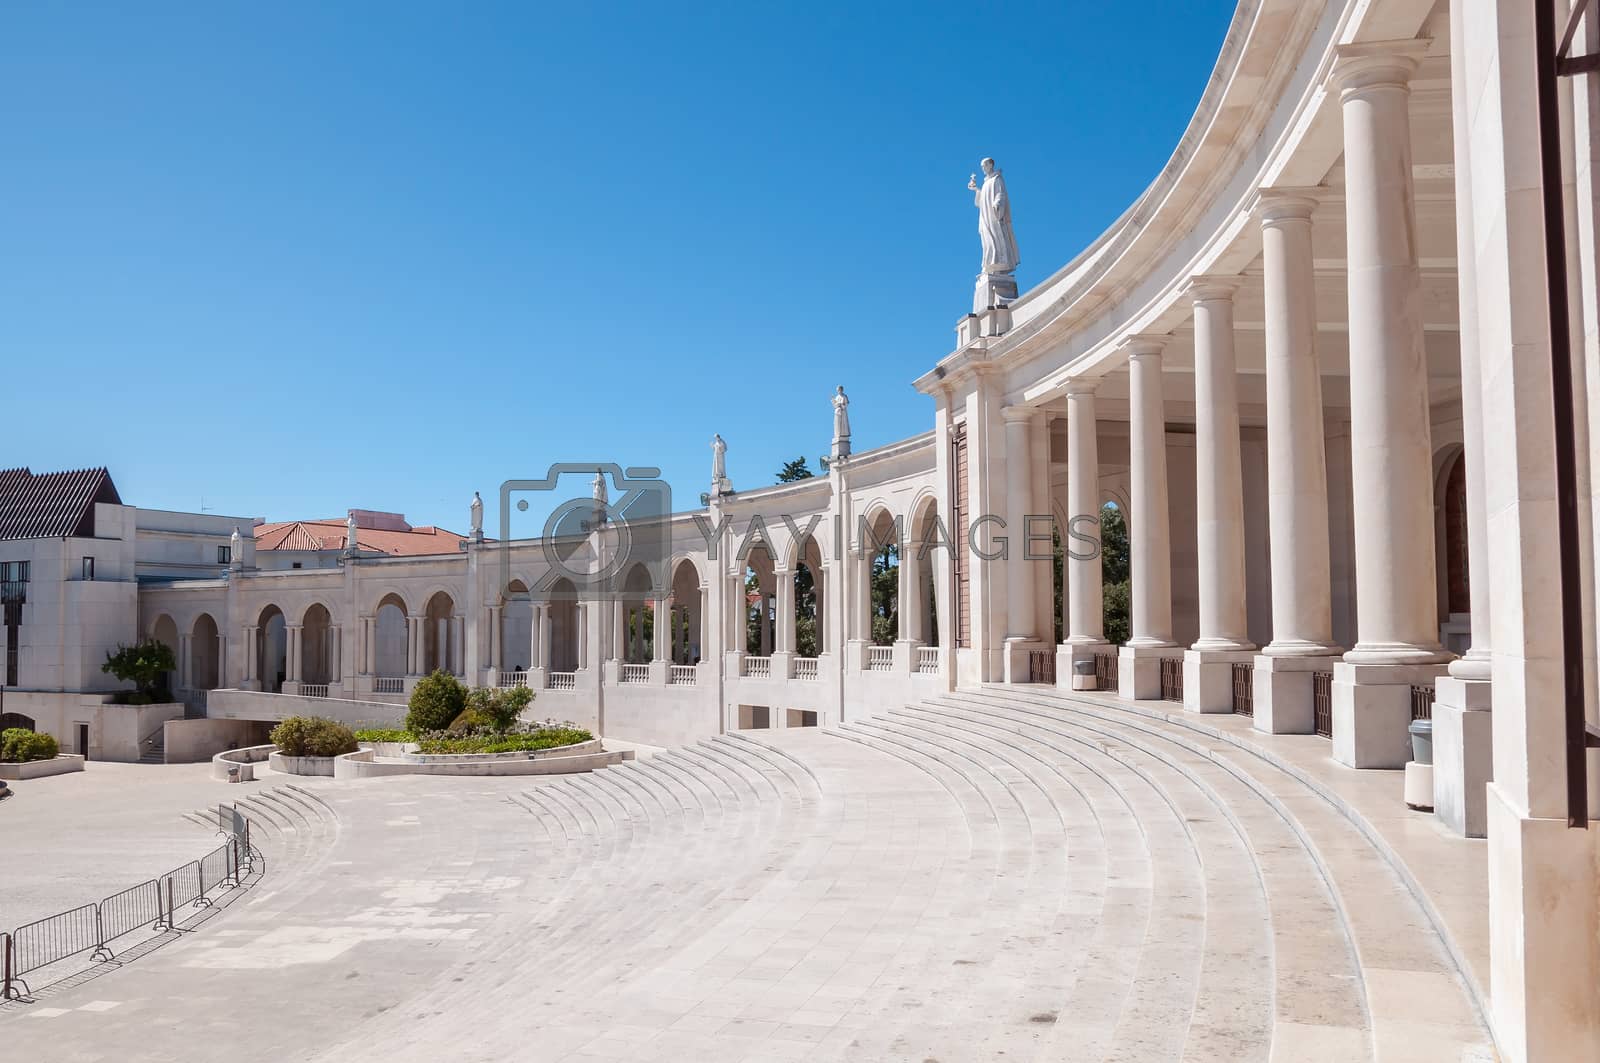 Royalty free image of Colonnade of Fatima Sanctuary by mkos83